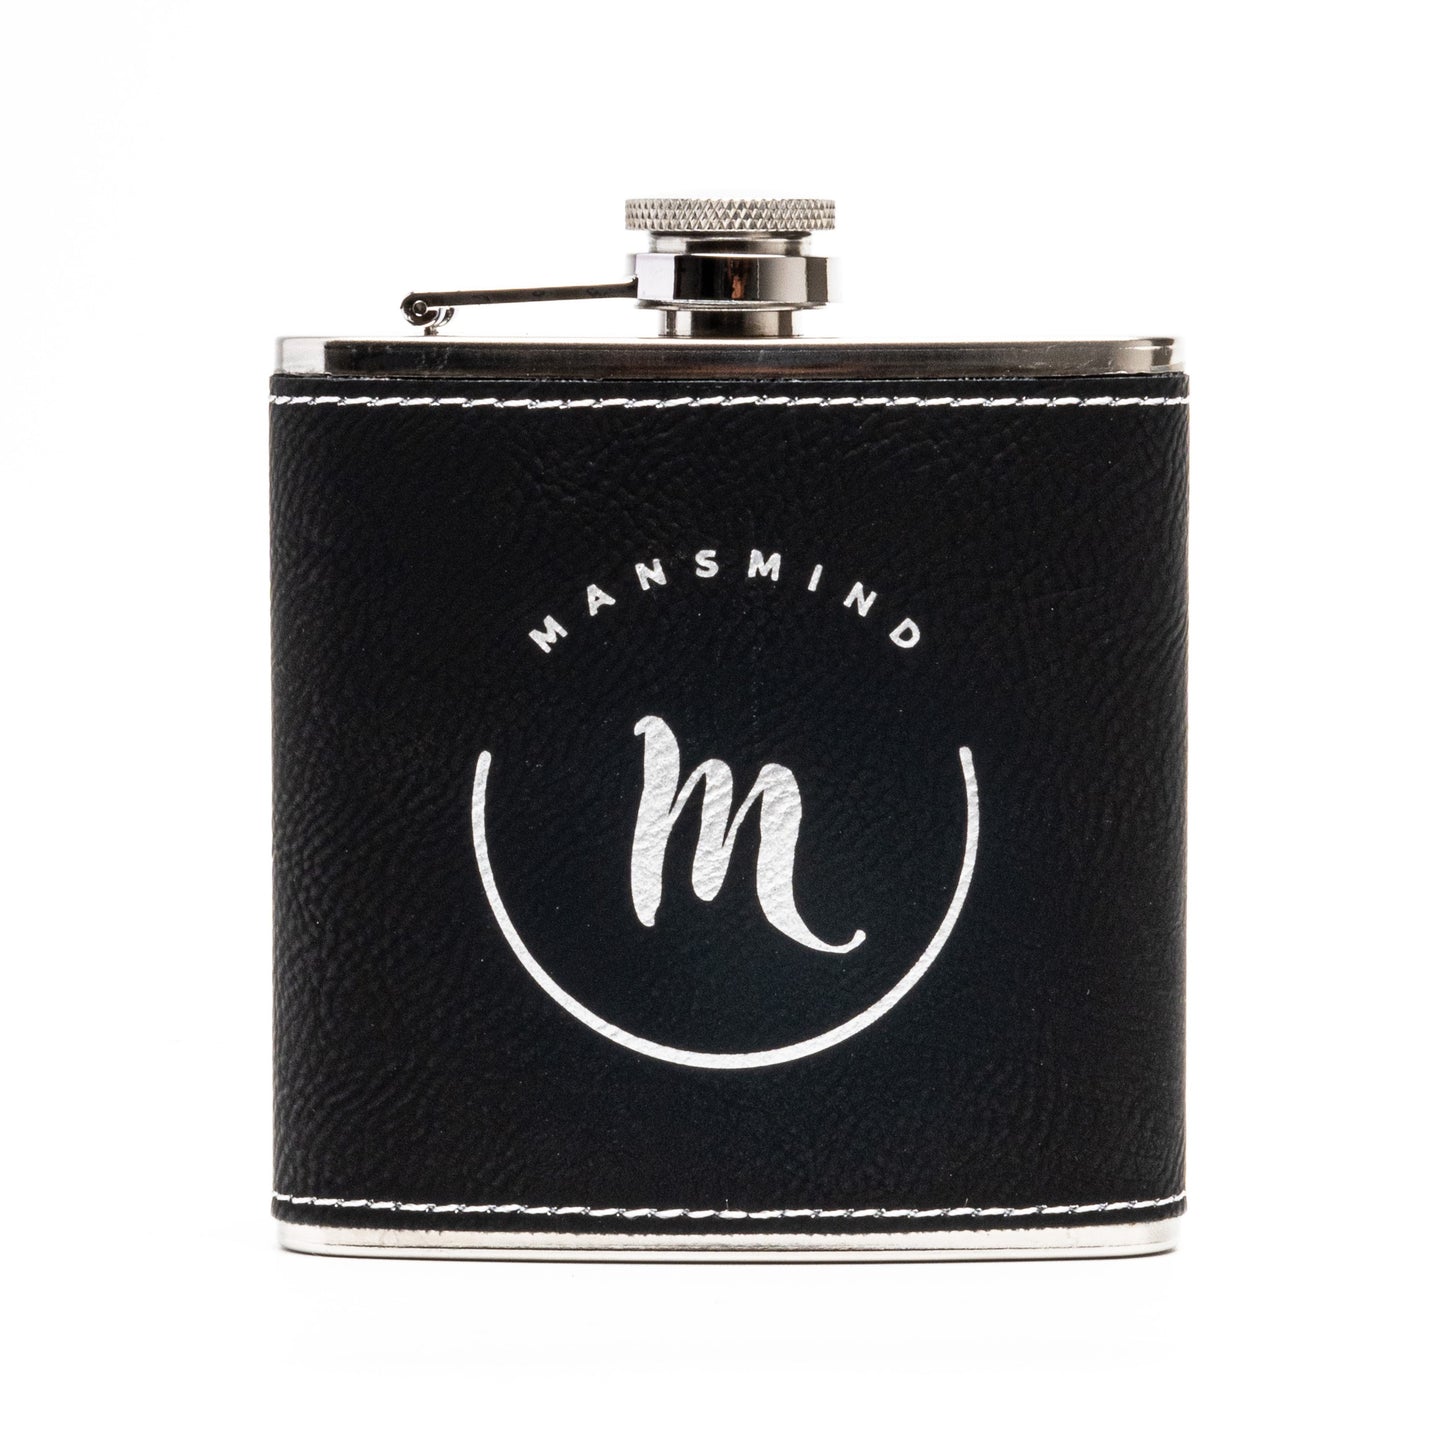 Premium Leather Hip Flask and funnel